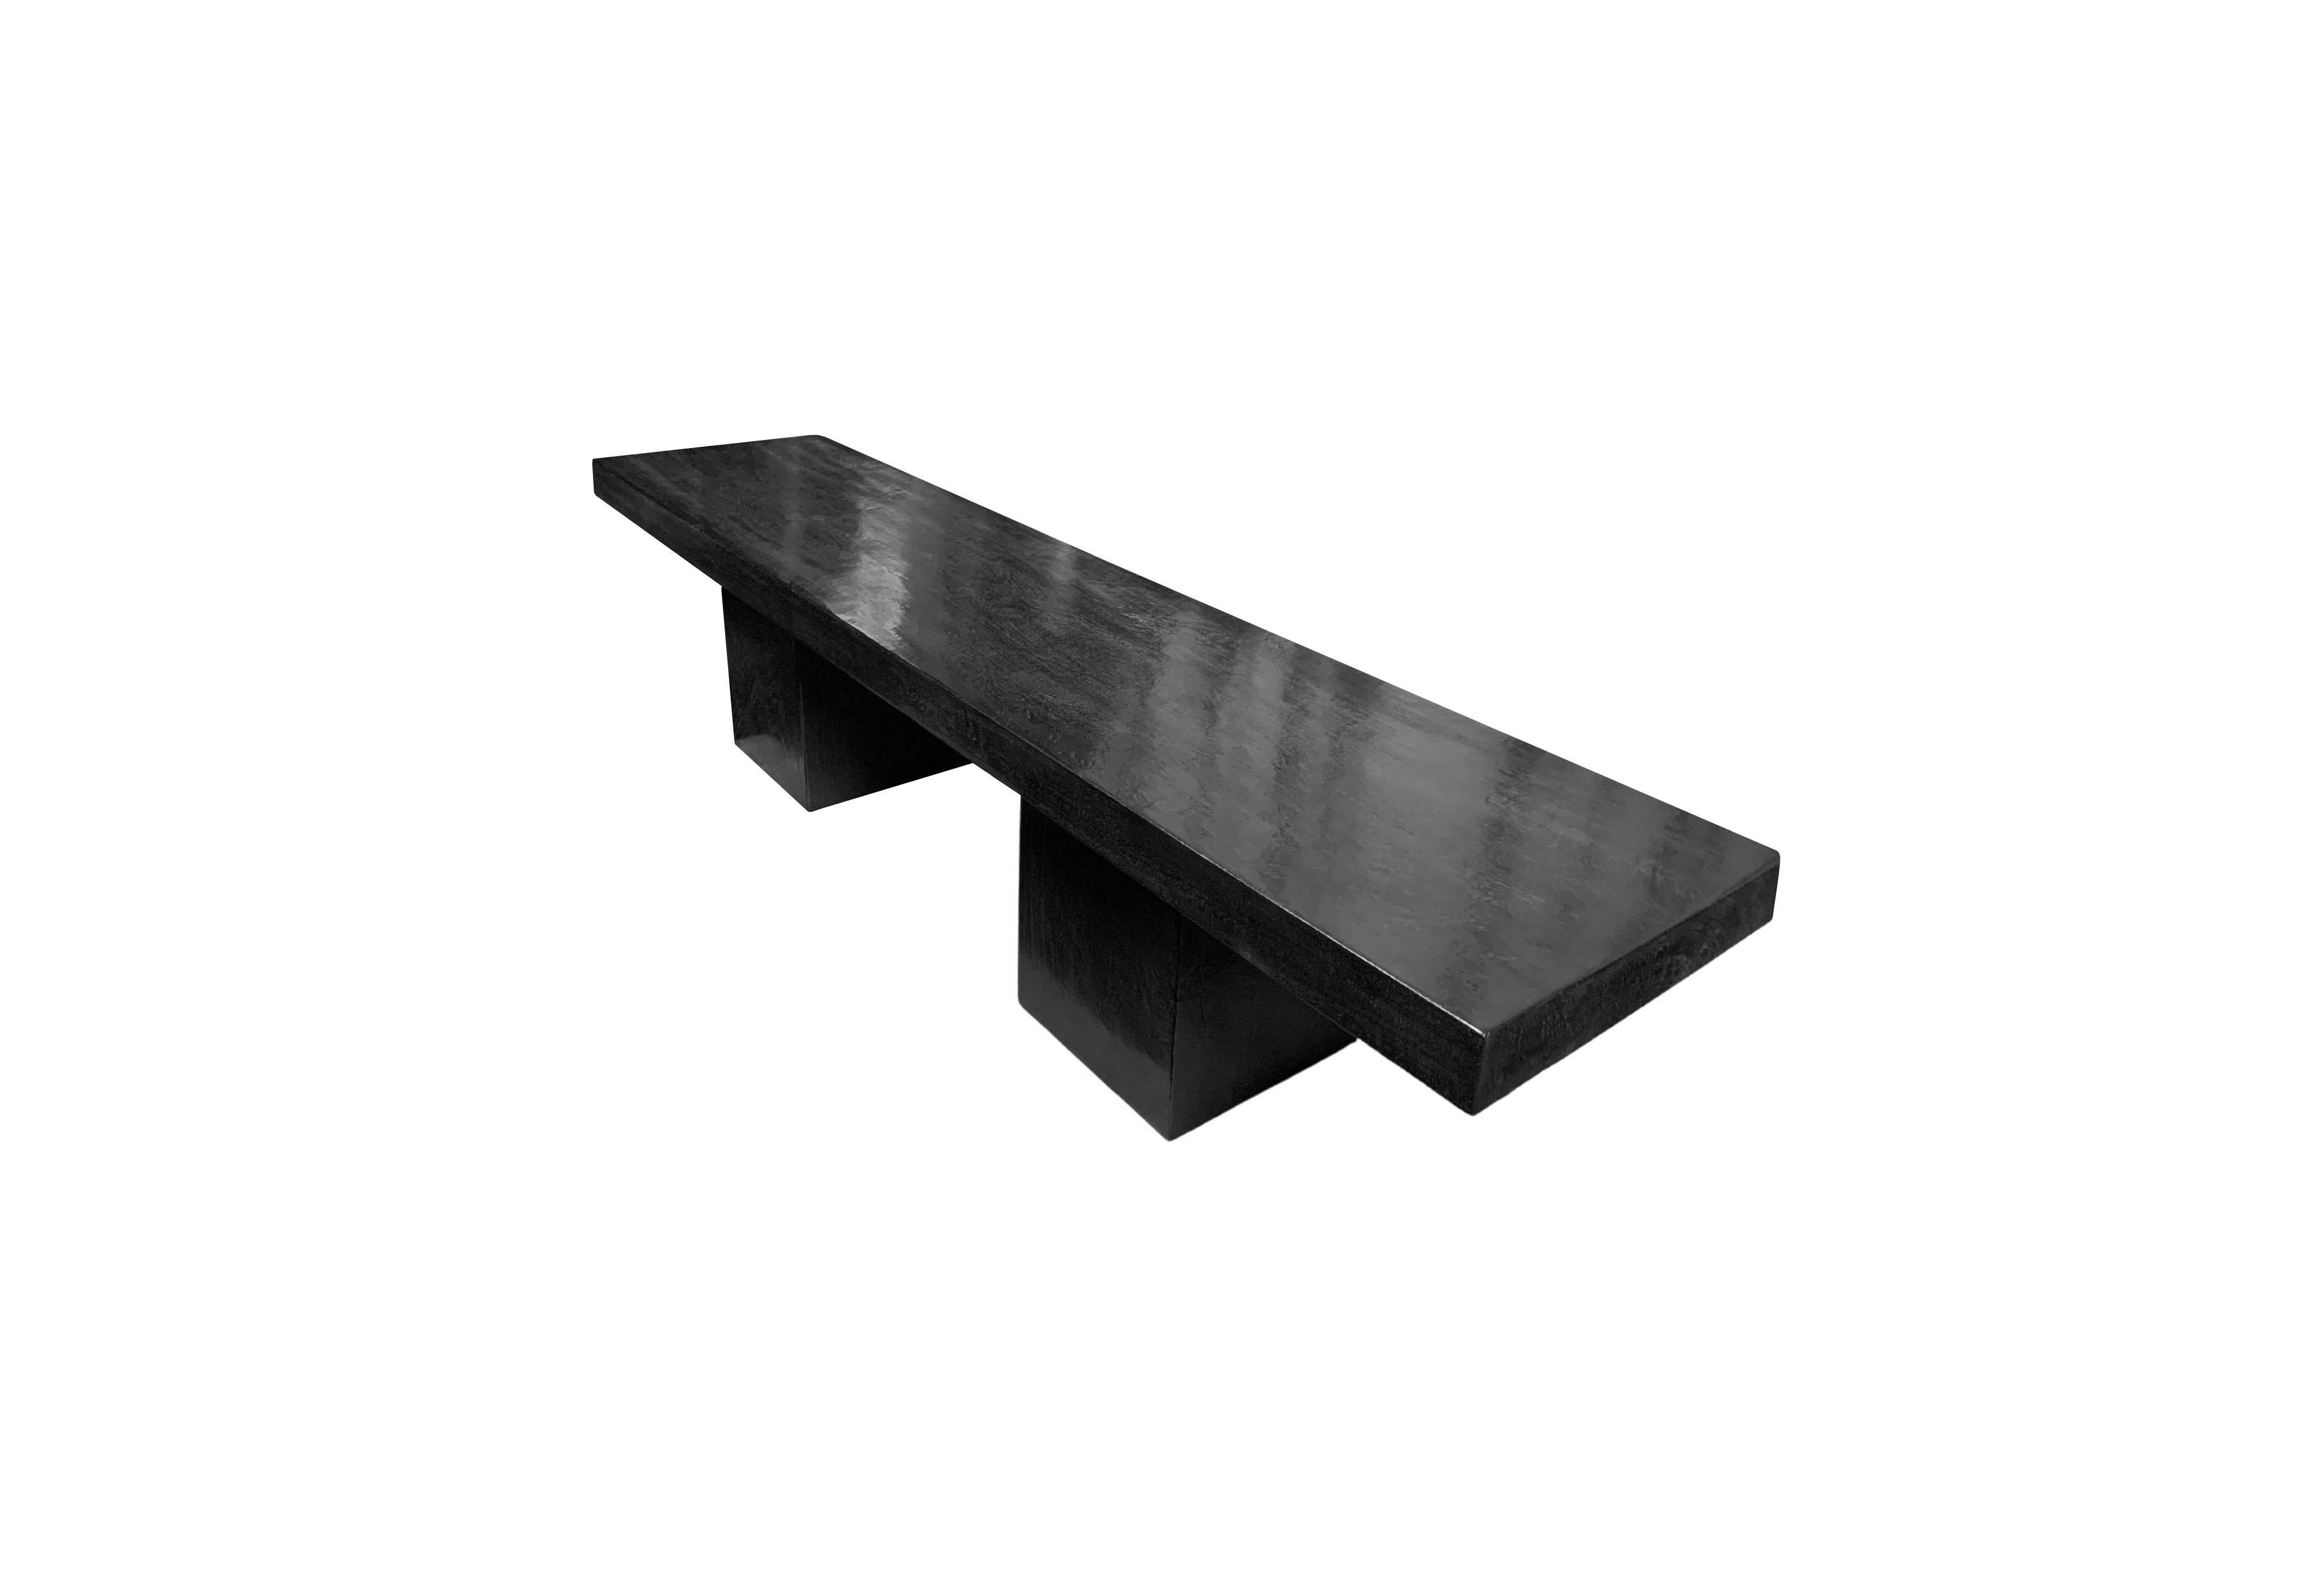 A sculptural mango wood bench. To achieve is rich black pigment the bench was burnt three times and then finished with a clear coat. The seat was crafted from a solid block of mango wood. The seat sits atop two solid, square legs. A wonderfully